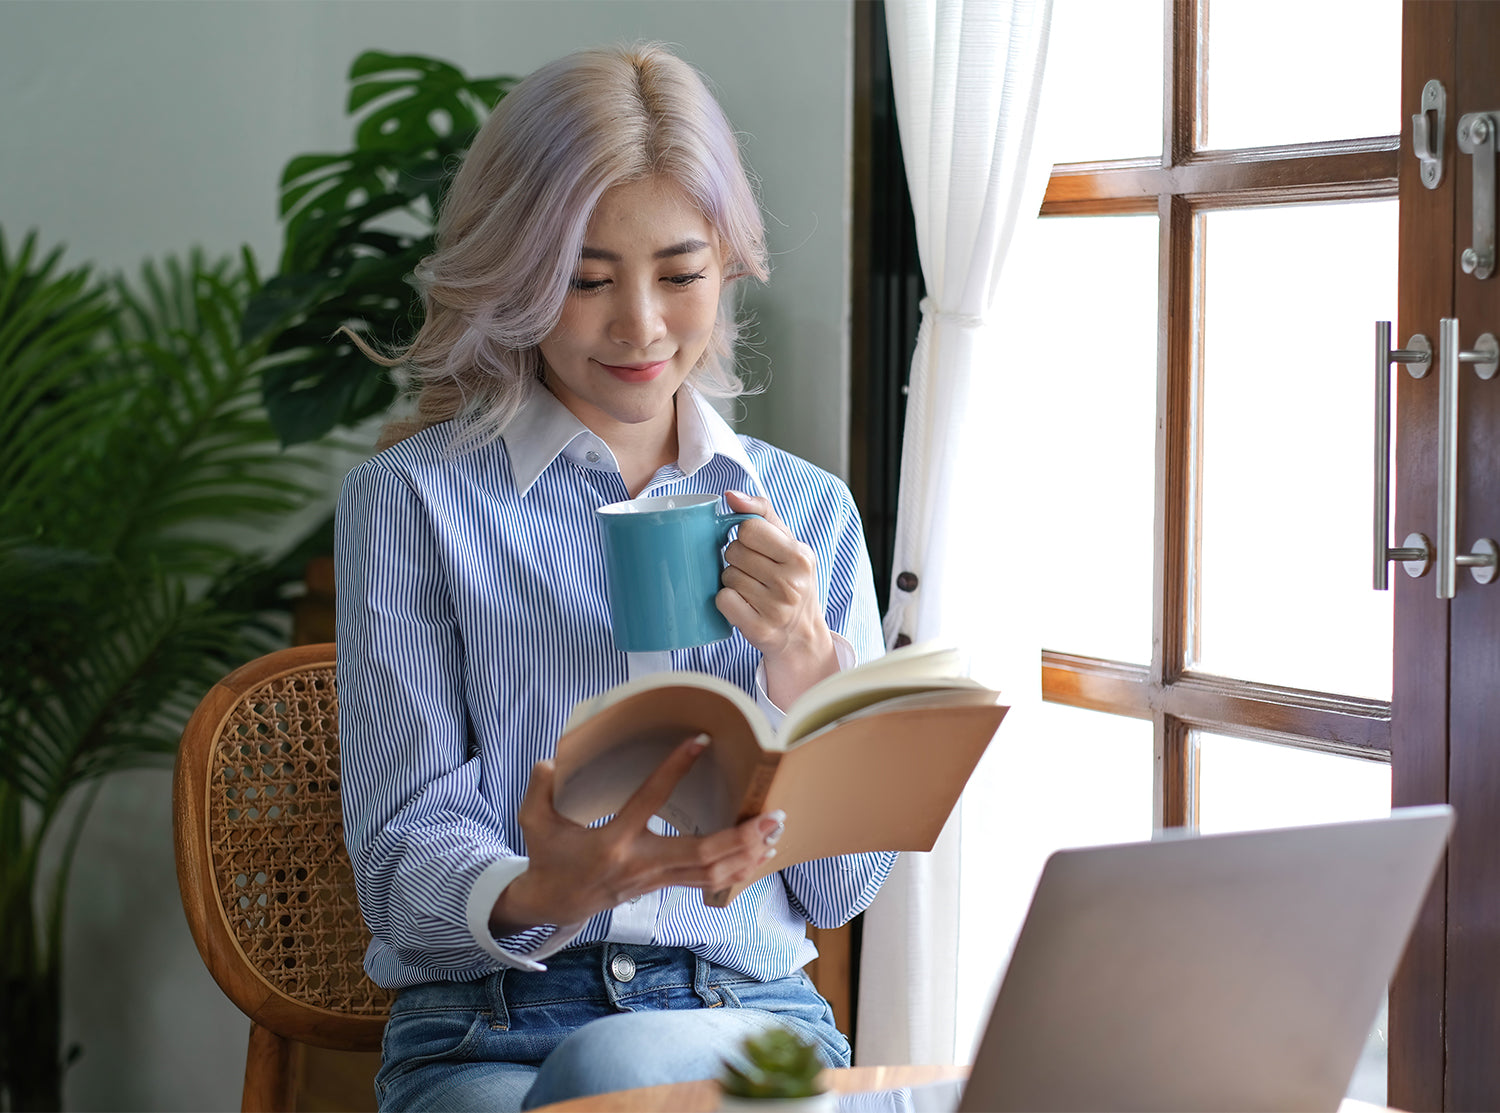 Nourished Self-care ideas blog, woman reading book siting down